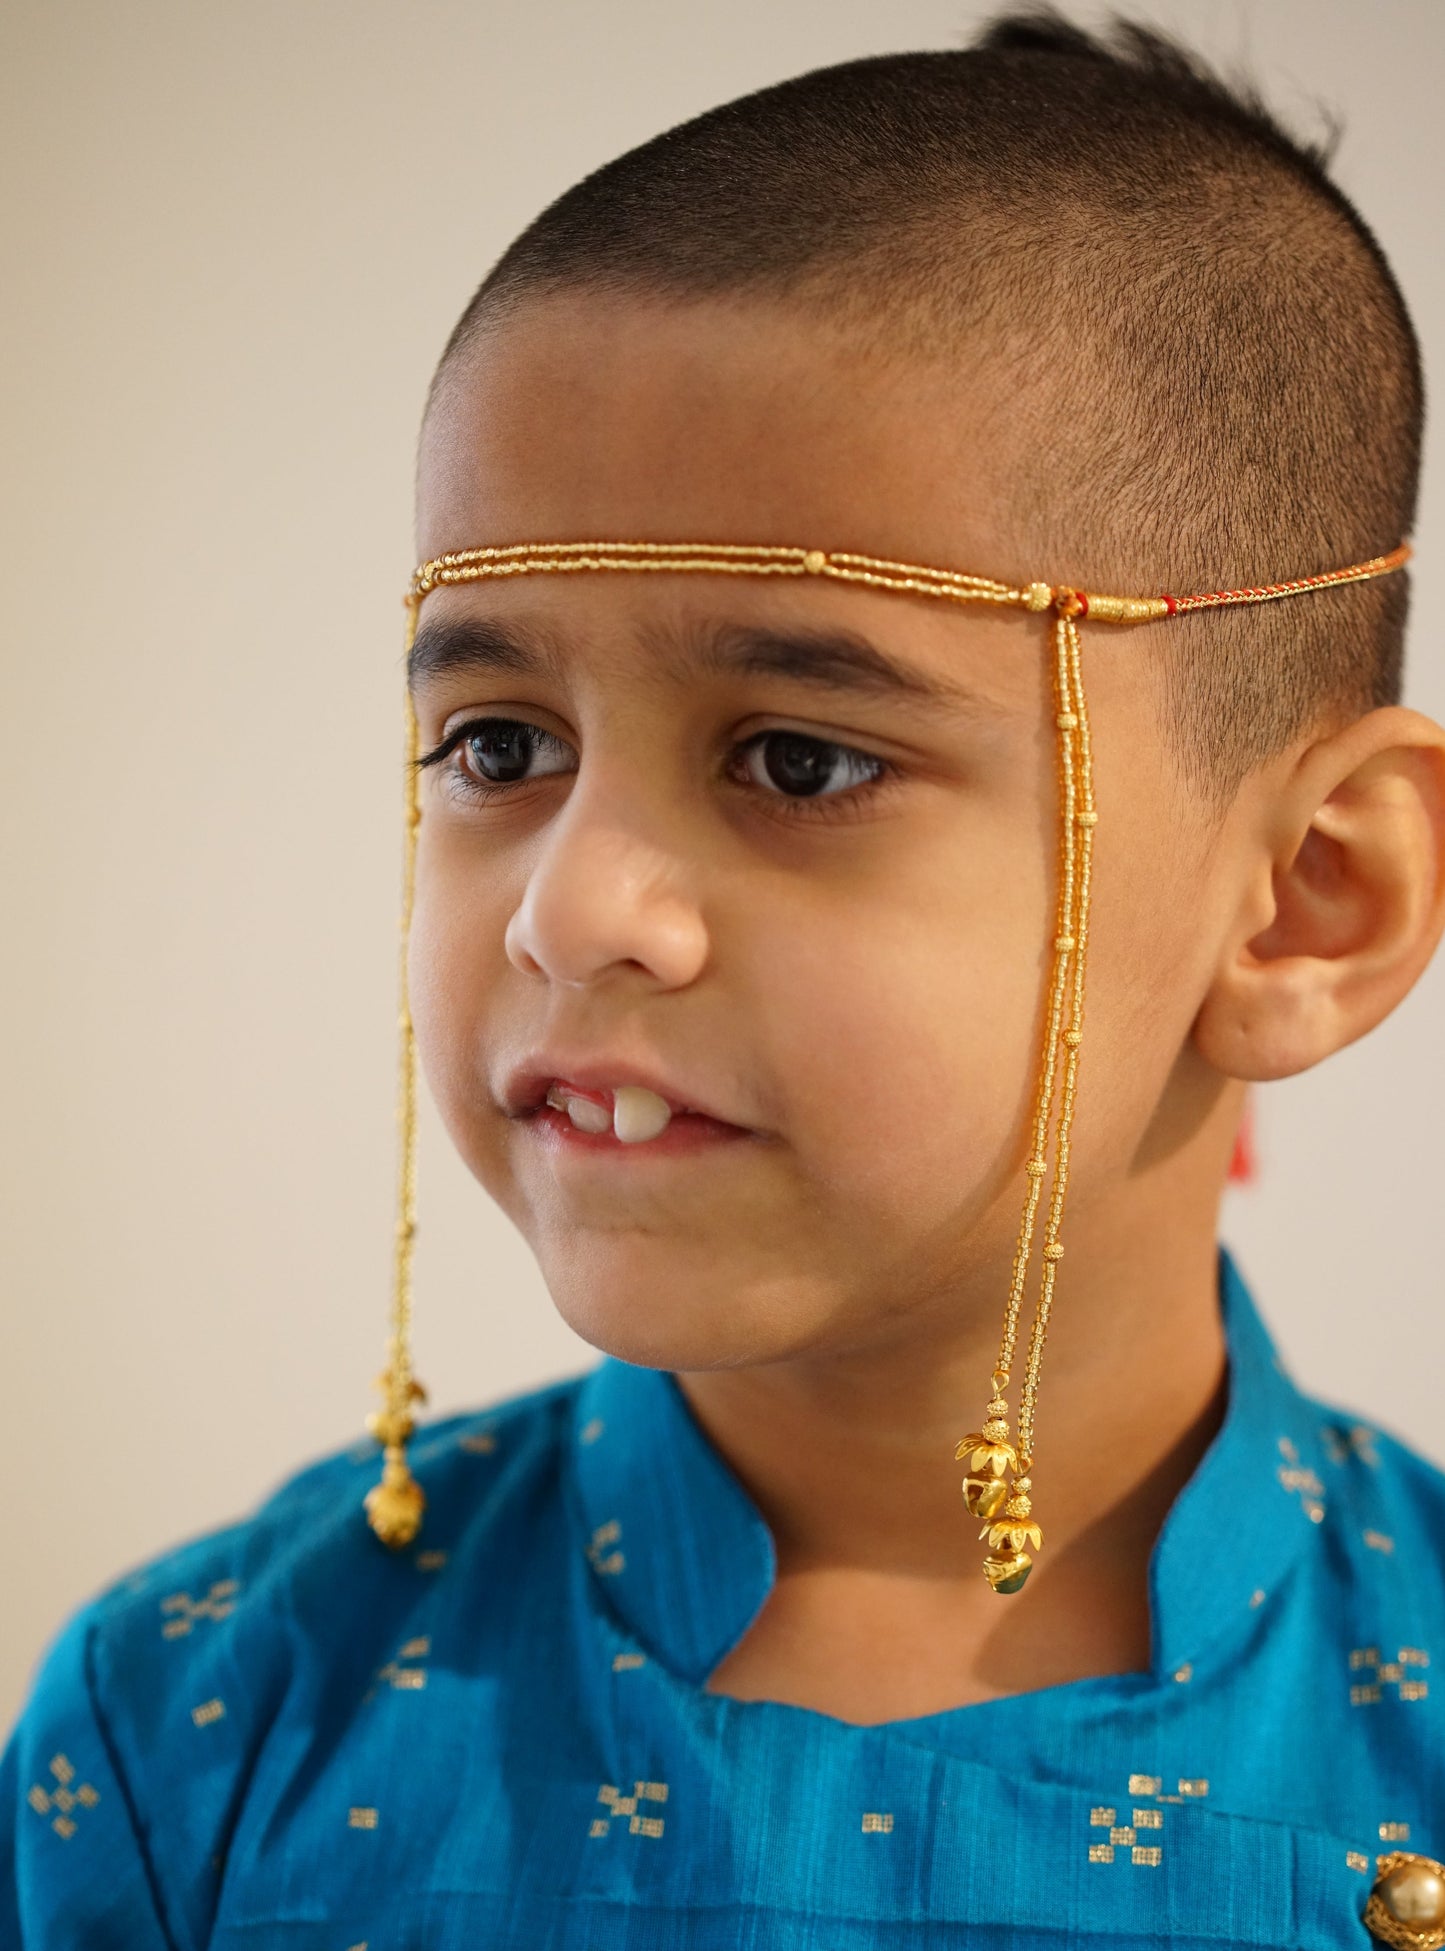 Mundavalya is a forehead ornament worn by Batu for Vratabandh/Munj/Upnayan/Thread Ceremony. Mundavalya,kanthi,bhikbali,topi,pagdi are boys accessories exclusively designed using Pearls,glass beads,jadau & gold plated findings for Batu,for Upanayan/Vratabandha/munj /thread ceremony.